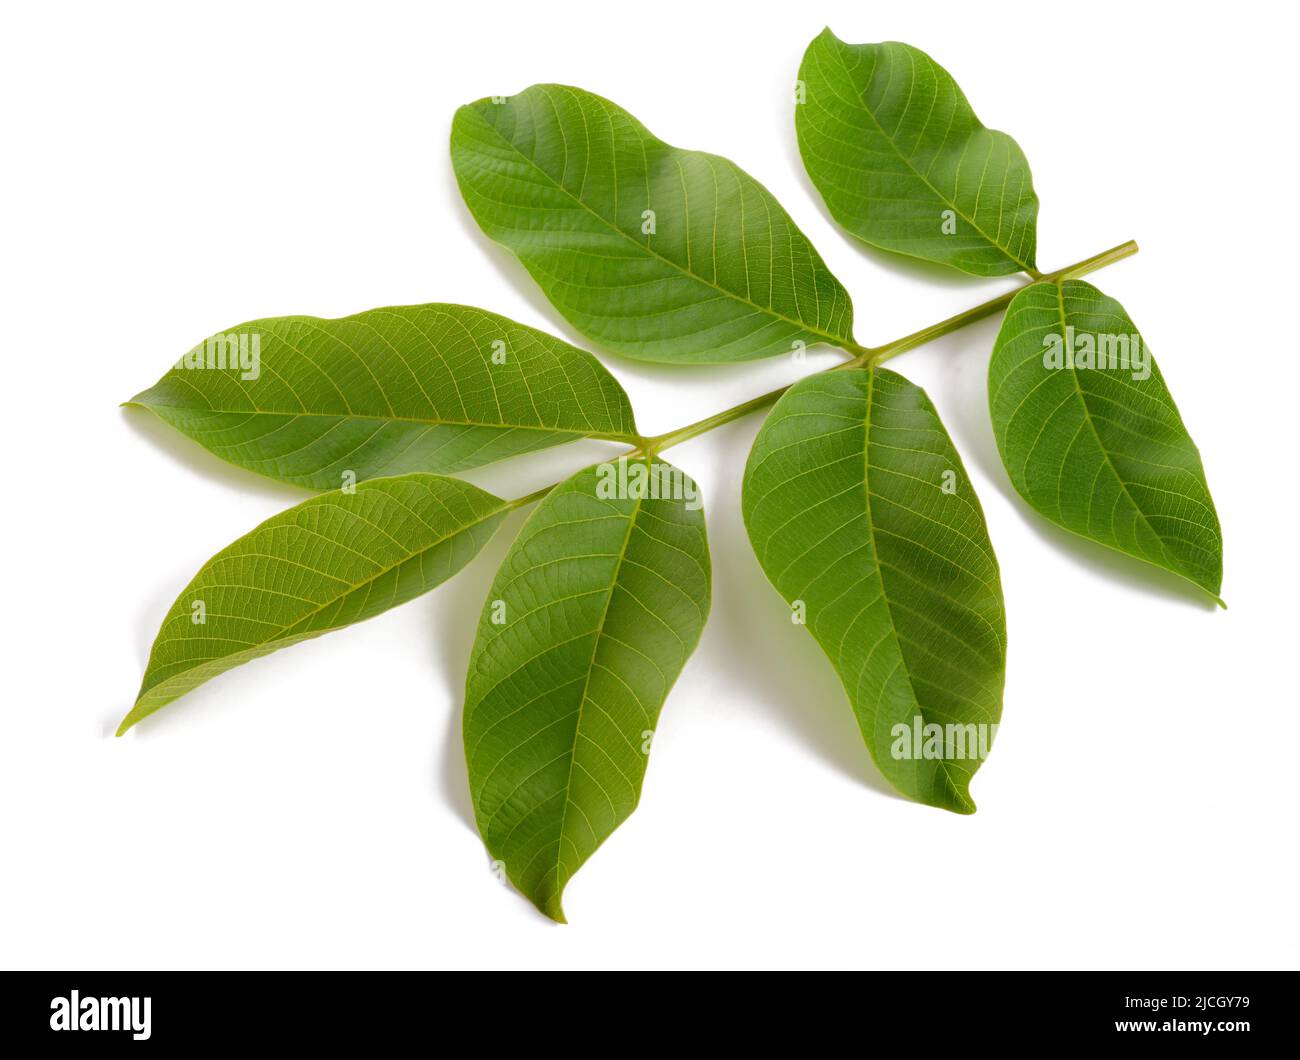 Walnut branch  with leaves  isolated on white background Stock Photo